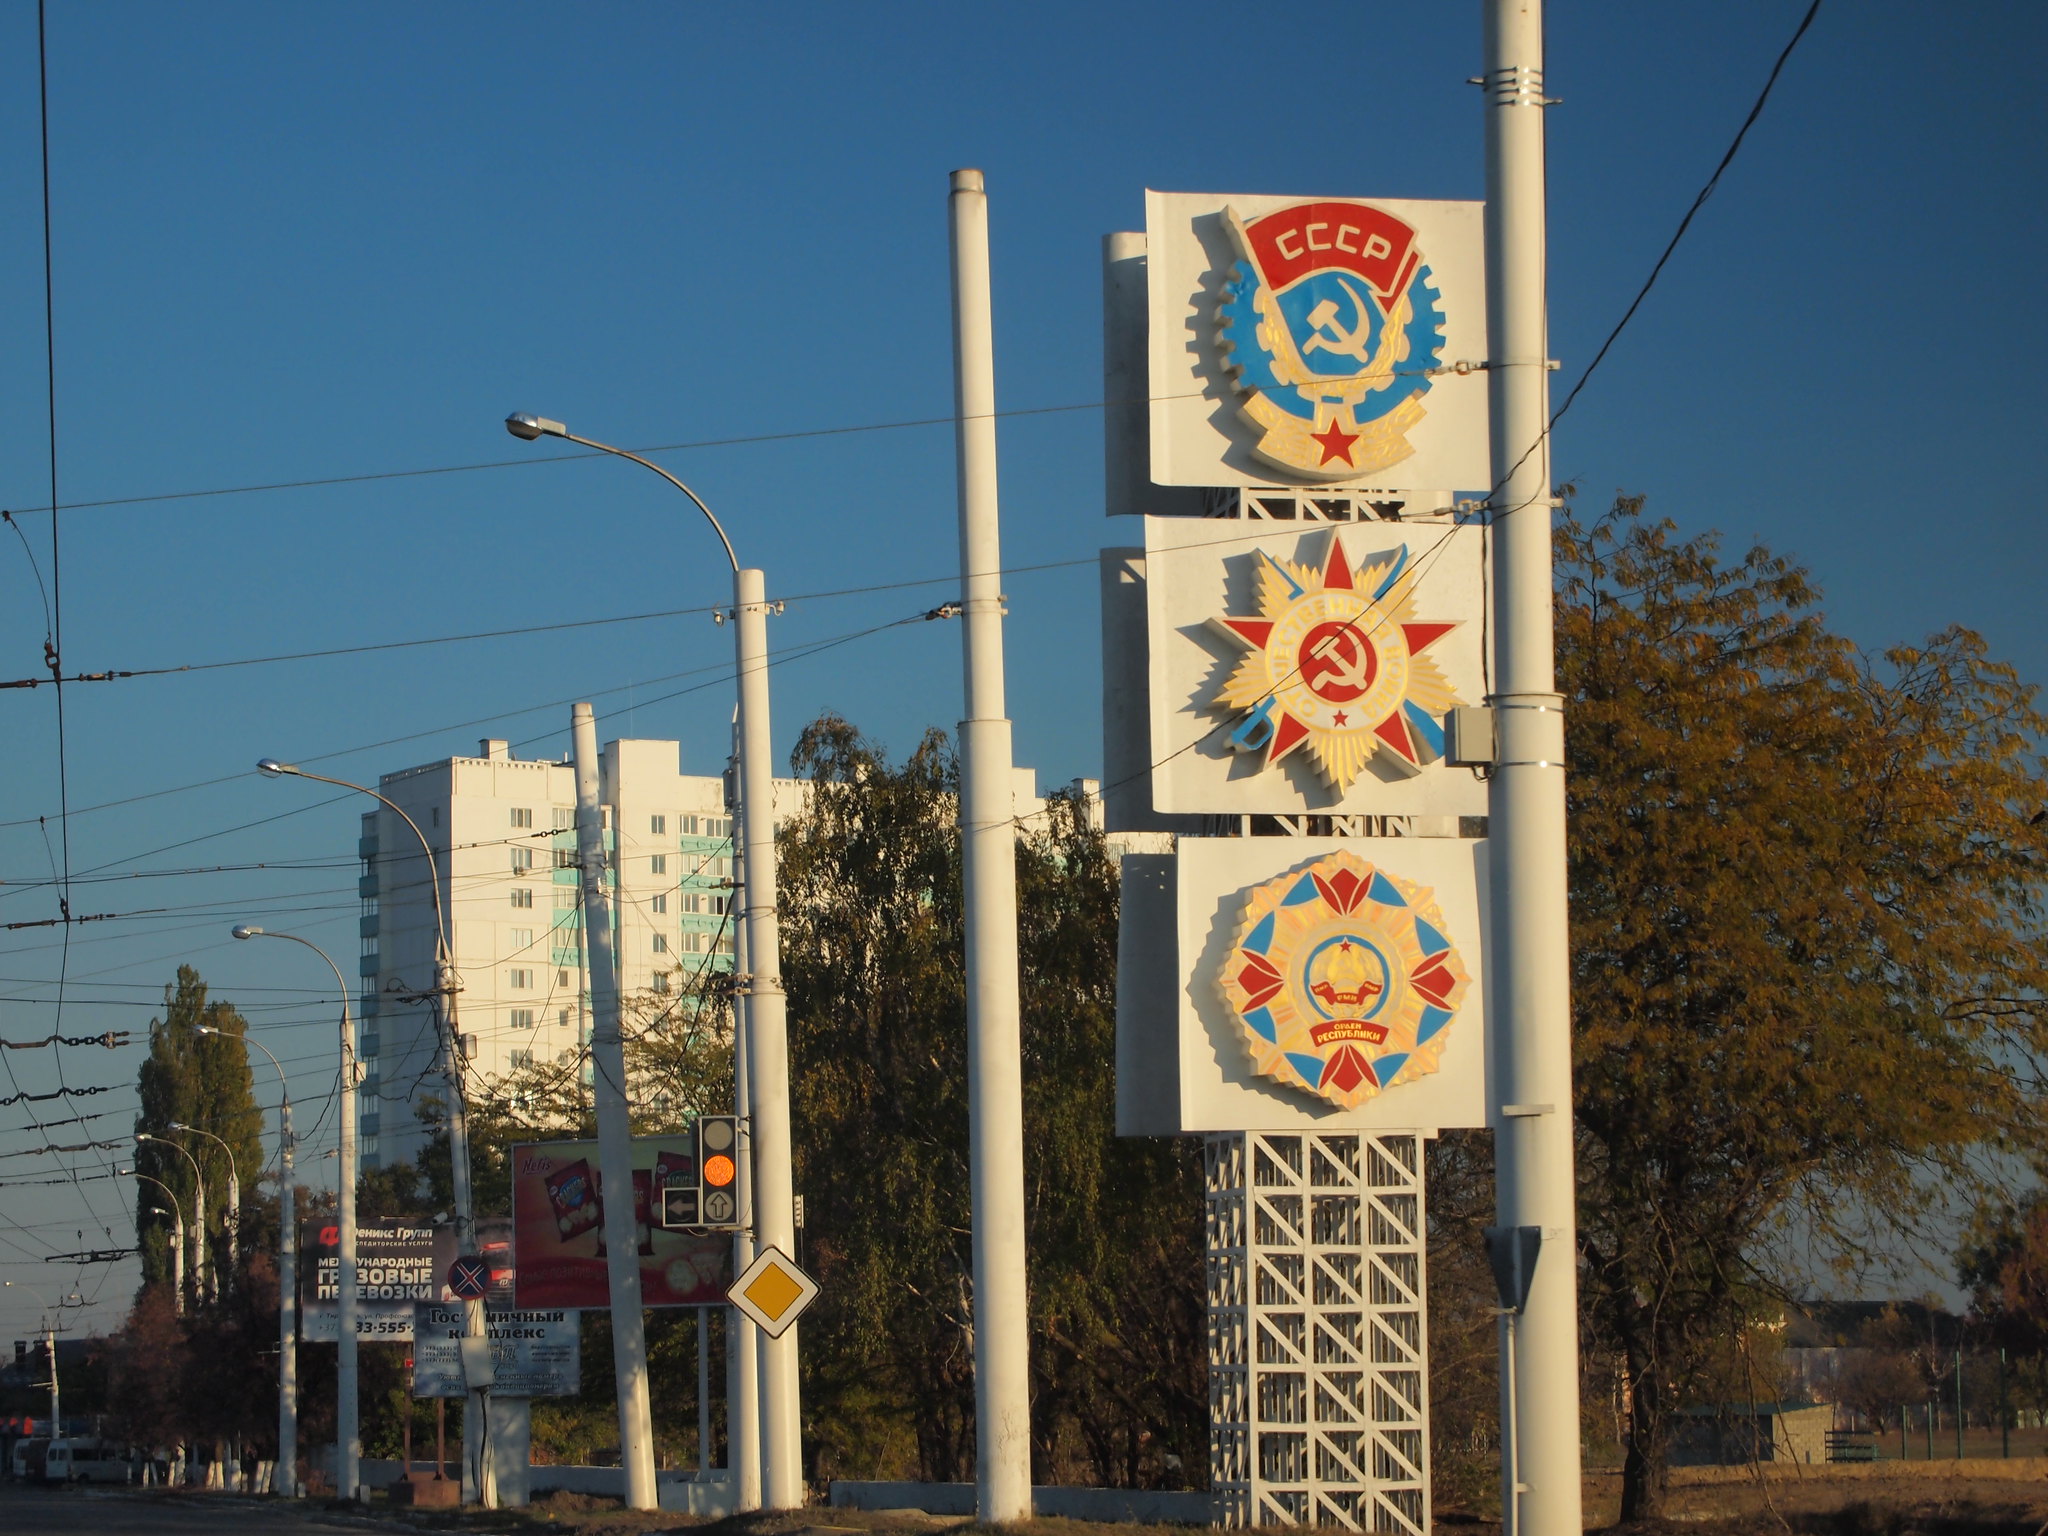 A road in Tiraspol, Transnistria featuring Soviet imagery, 2016.